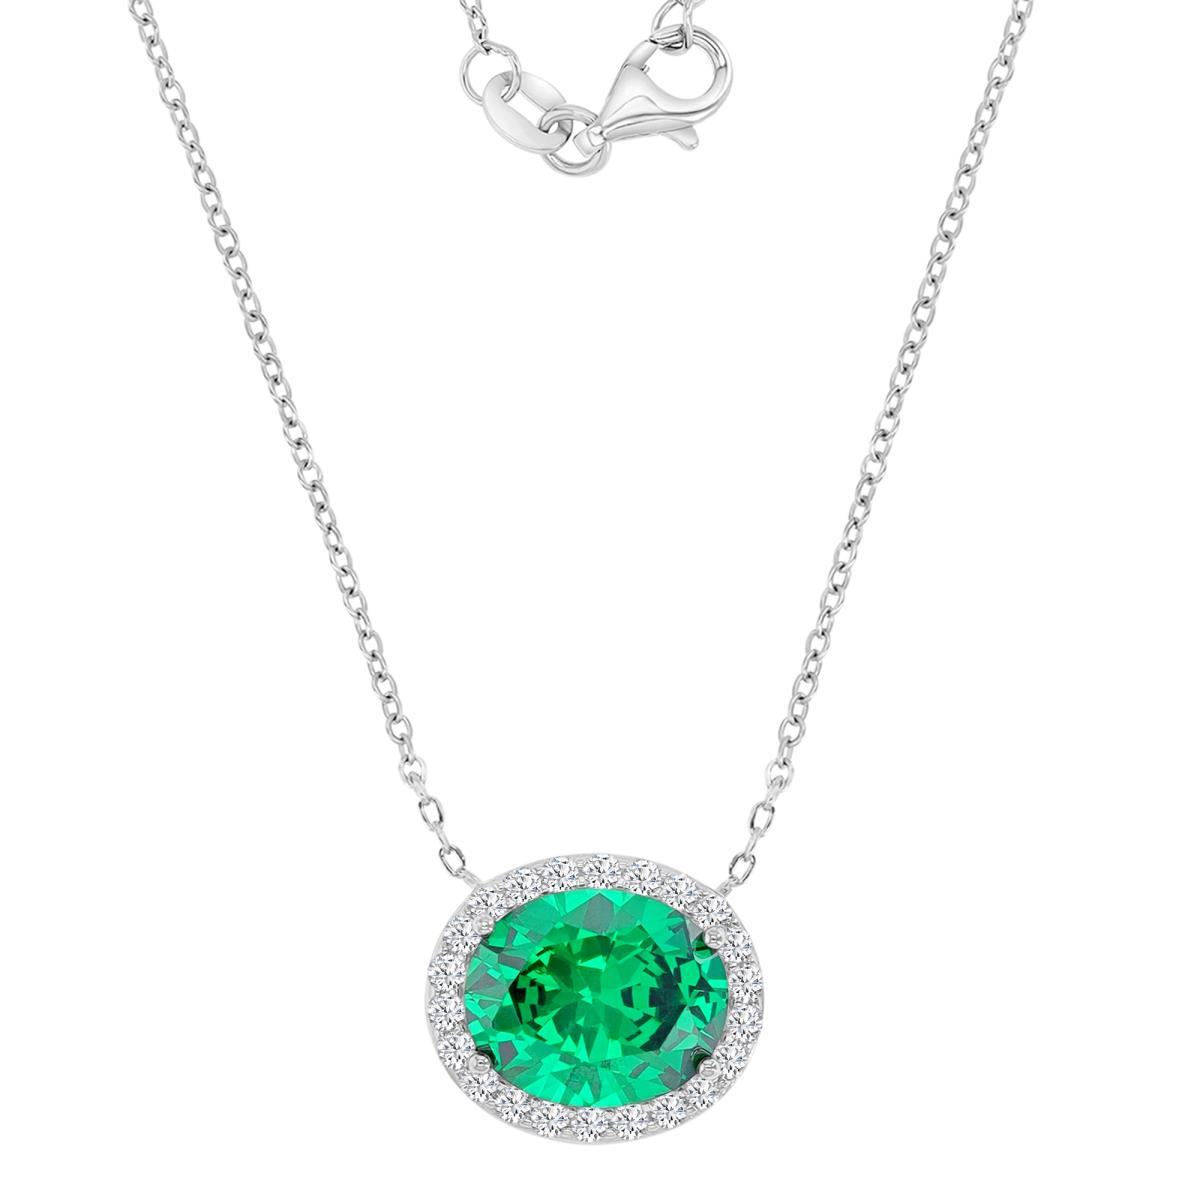 Sterling Silver Rhodium 15.6X13.4MM Polished Green CZ & White CZ Oval Cut Pendant 18+2" Necklace